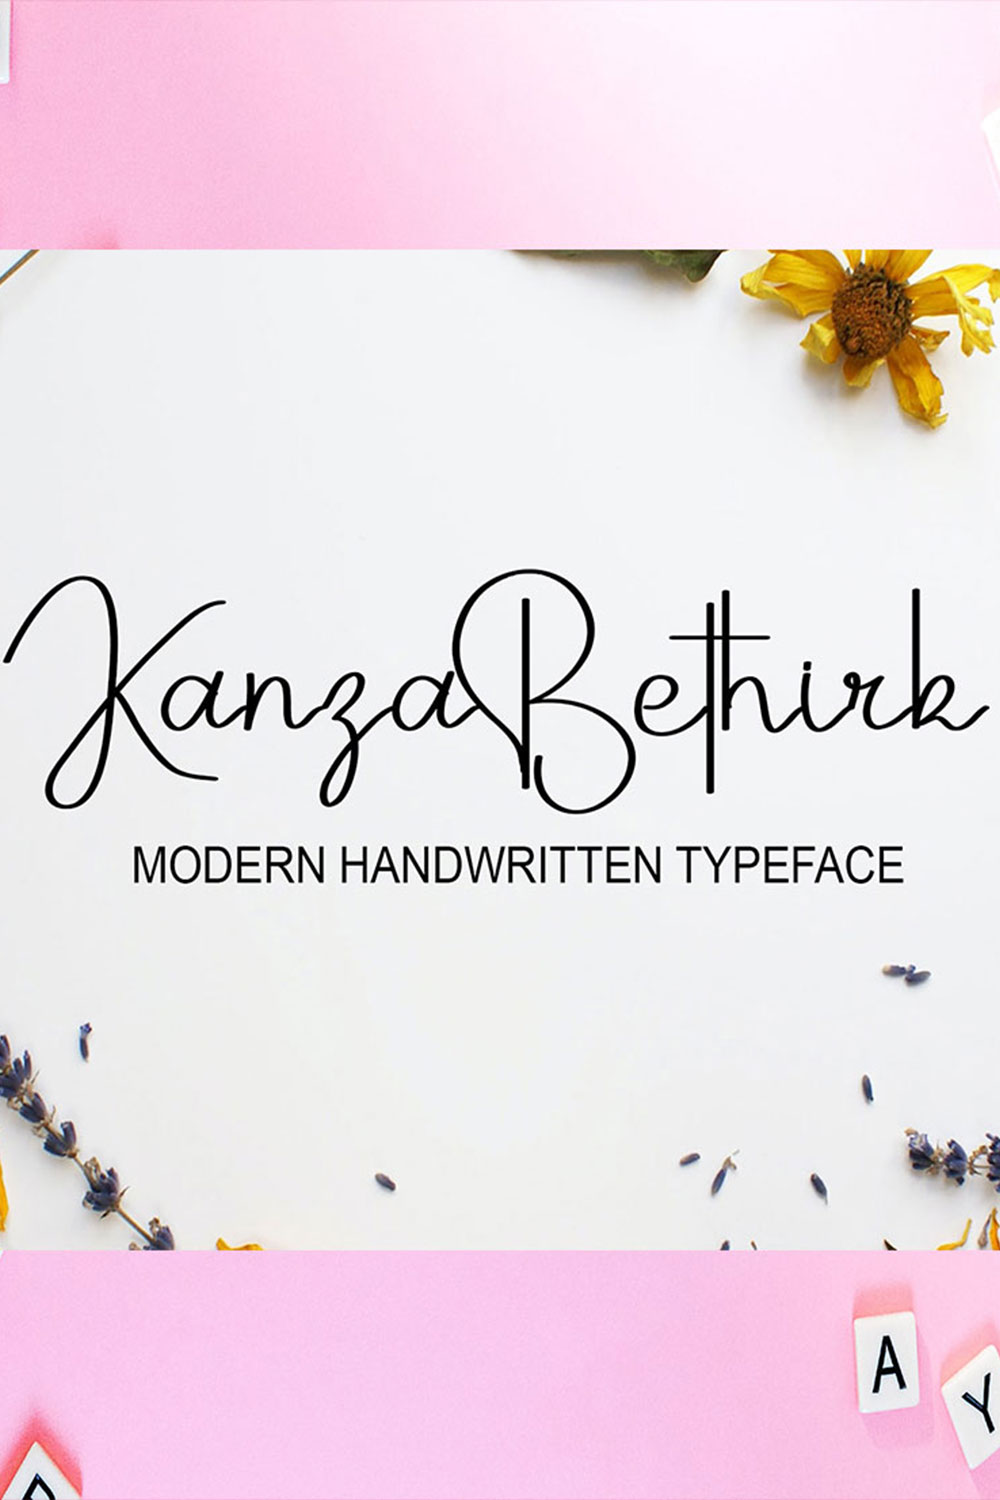 Image with text showing beautiful Kanza Bethirk font.